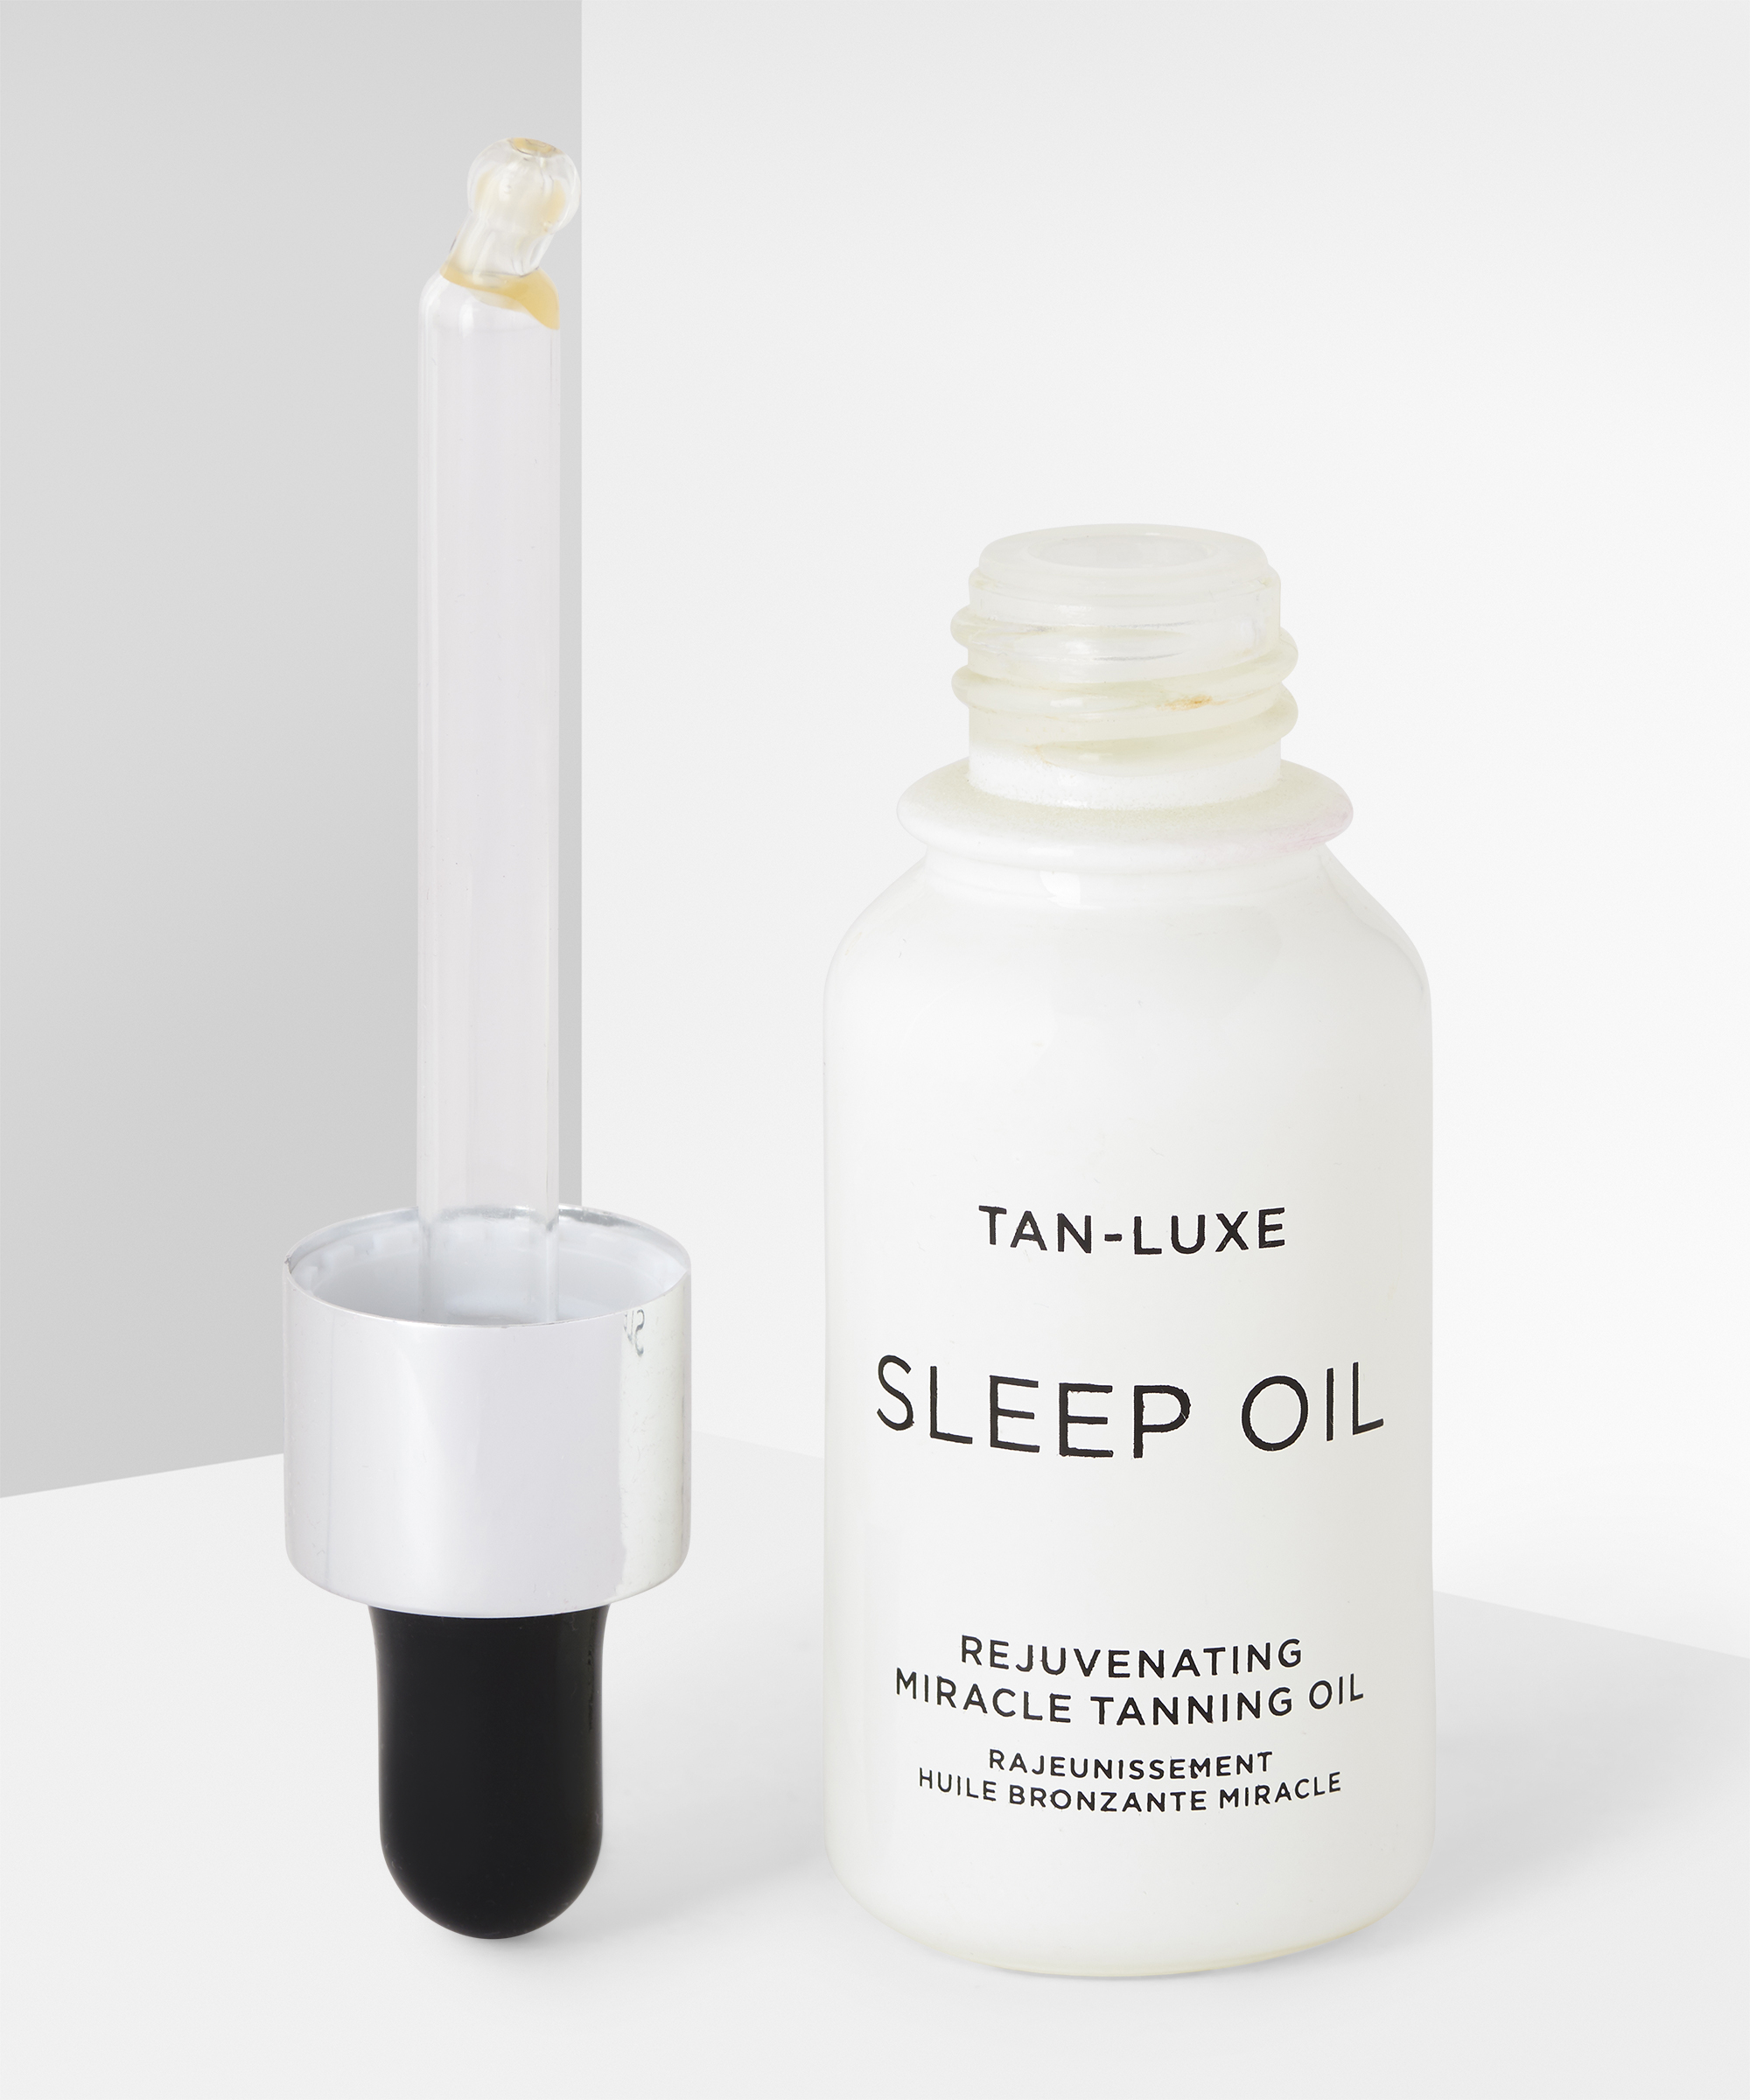 TAN-LUXE The SLEEP OIL at BEAUTY BAY